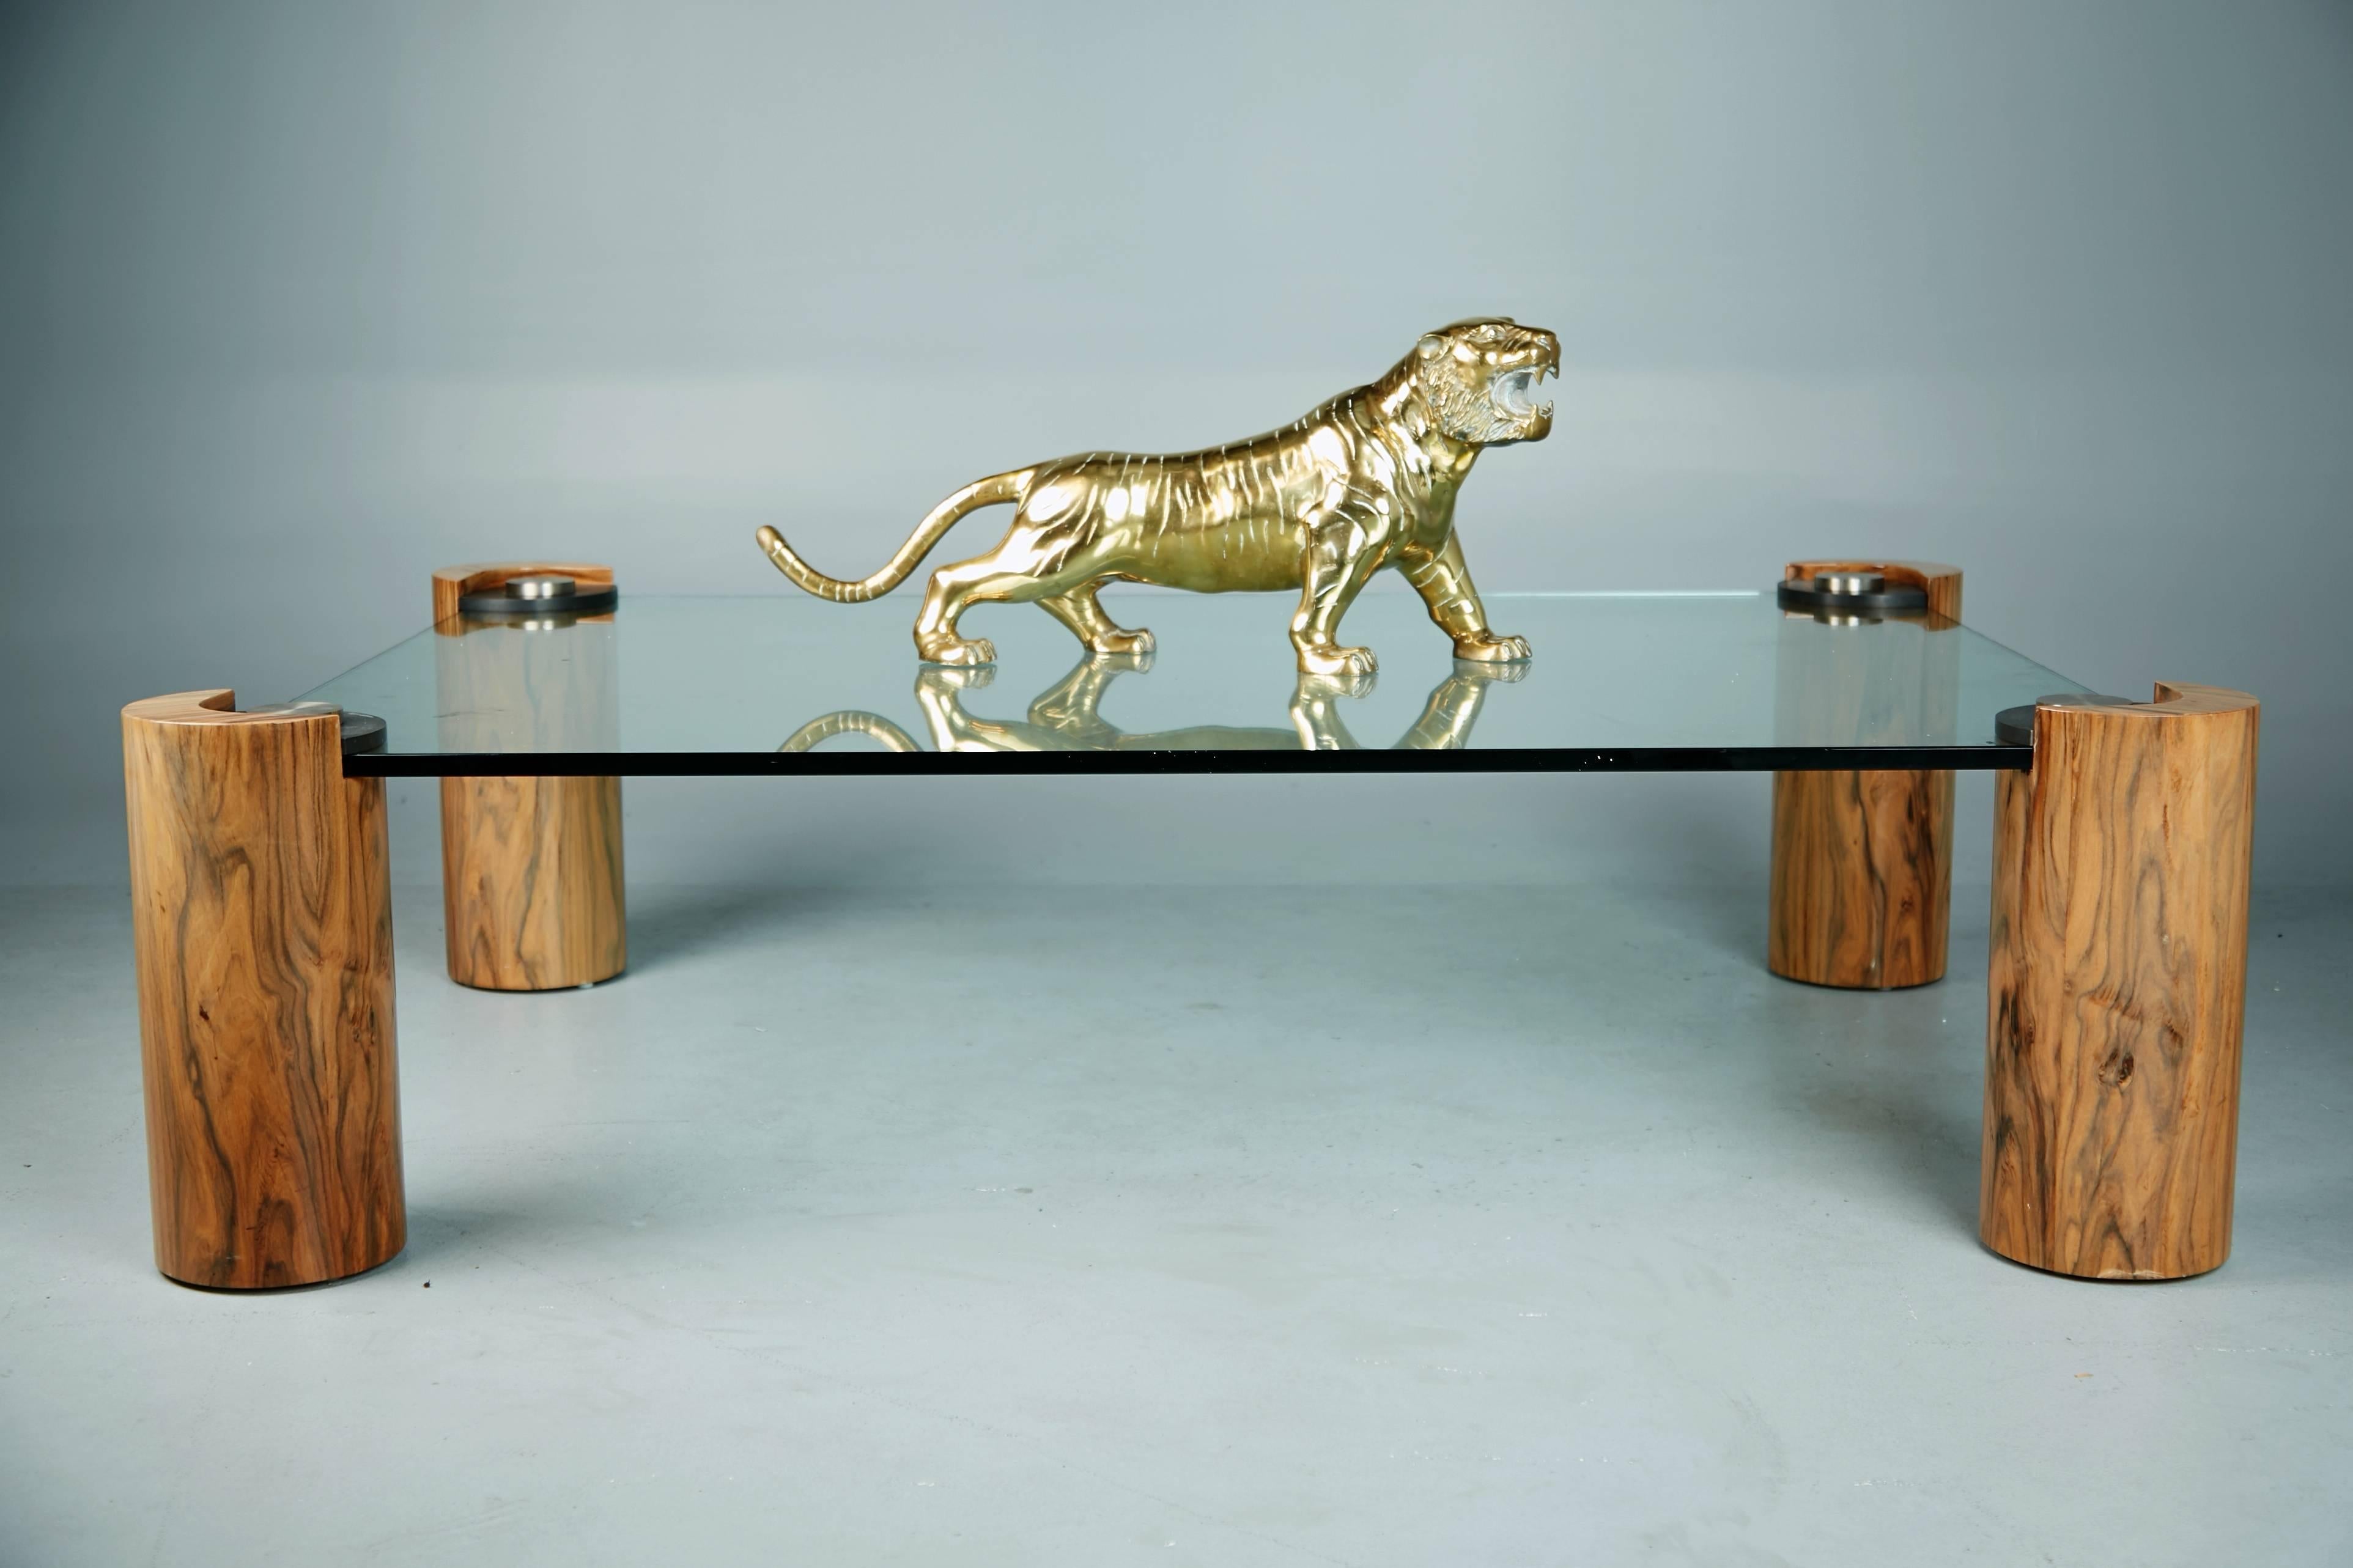 Gleaming majestic looking tiger statue which would be a great accent to any interior. This svelte beast is fabricated from brass, an on-trend material currently and would add a touch of warmth to a concept as well as being an eye-catching piece.